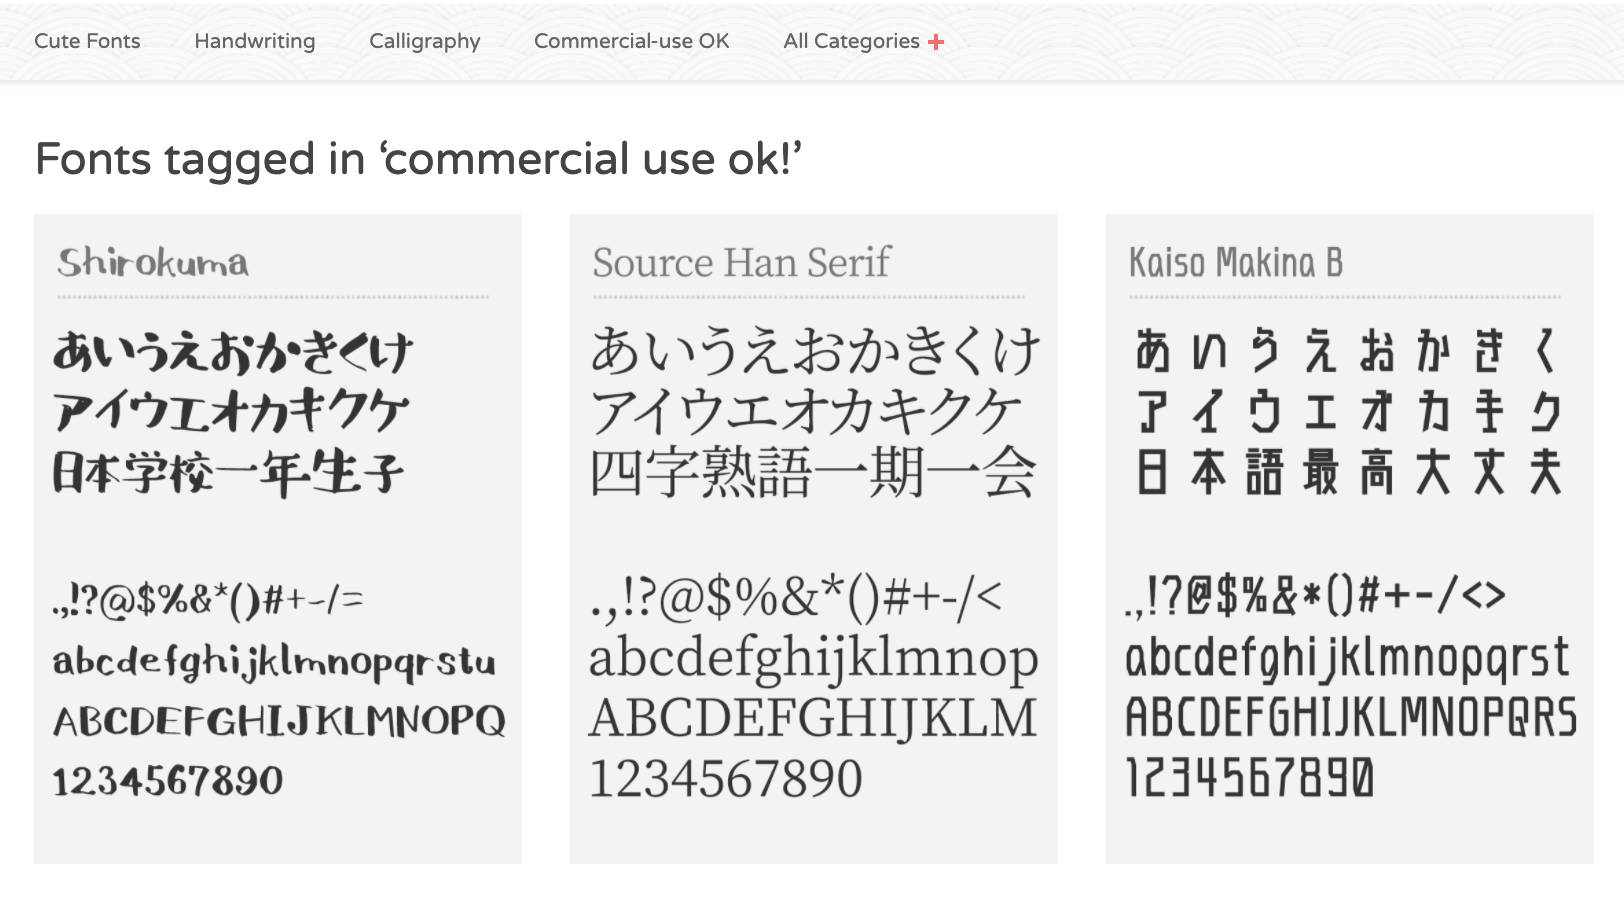 Design typography  OFL Open Font License Google Fonts Variable fonts Fontsquirrel FREE JAPANESE FONTS 100font what the font font style 免費字型 免費商用字型 字型庫 商用字型